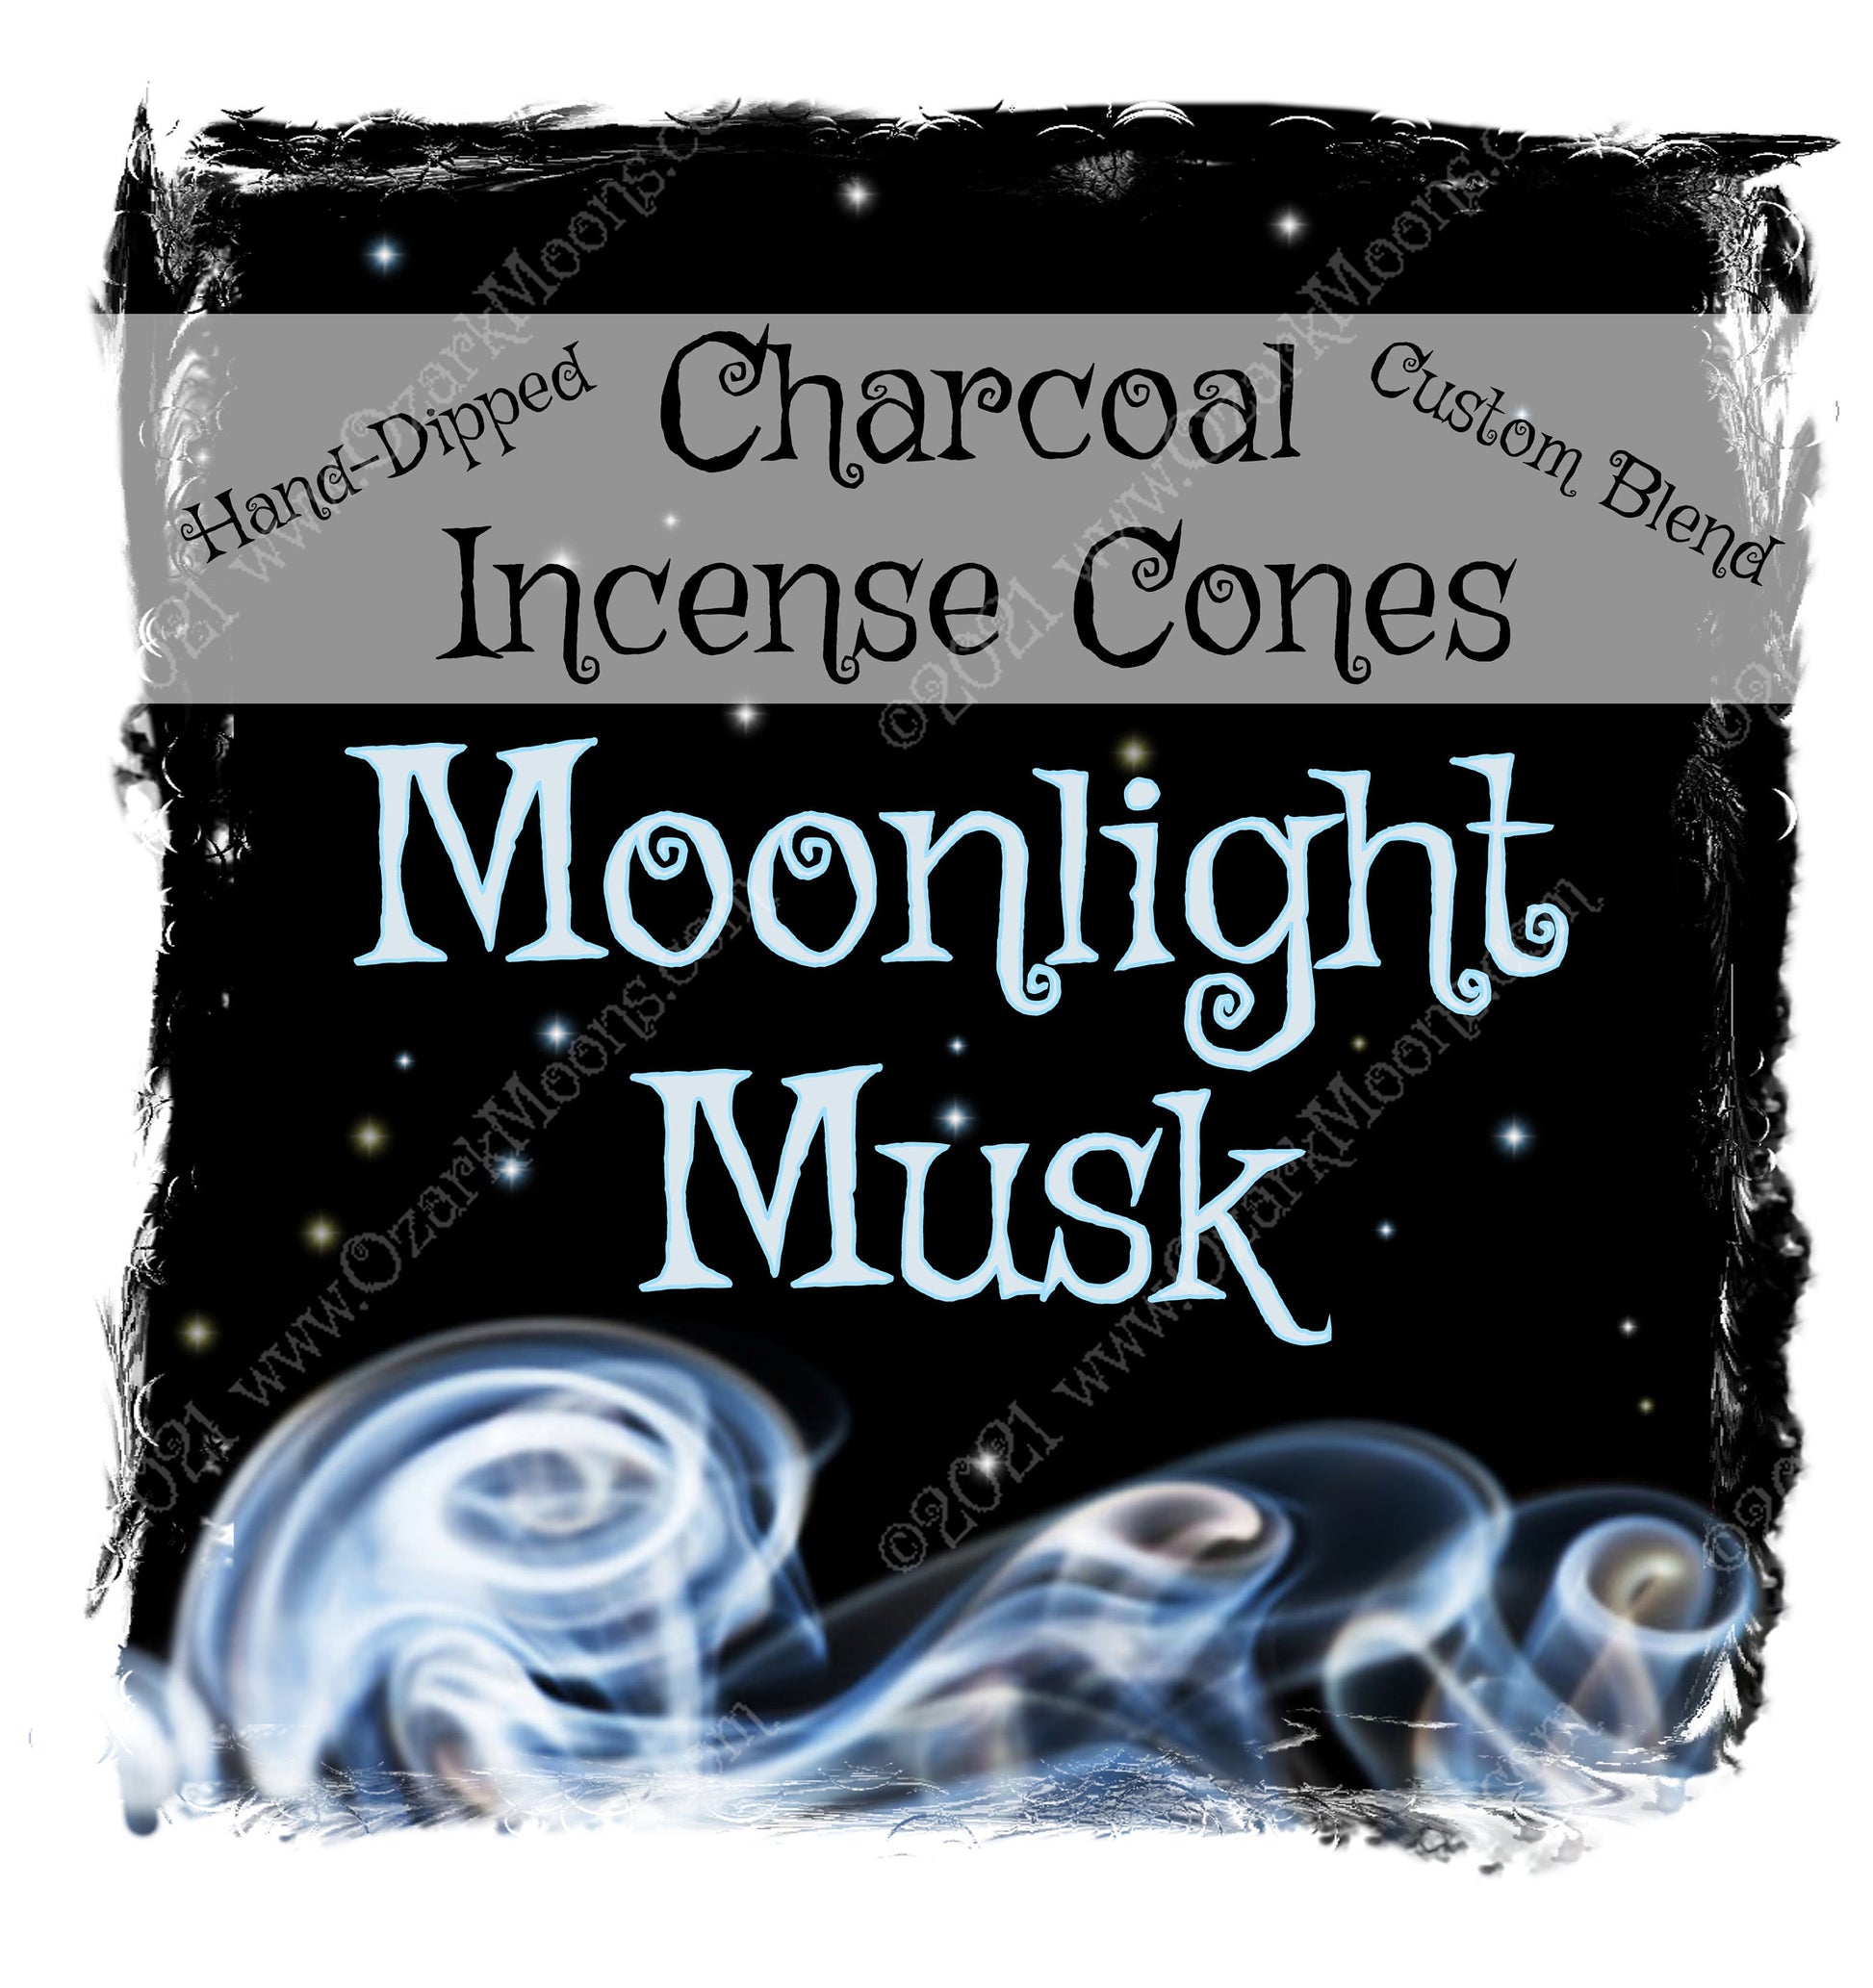 Moonlight Musk Charcoal 1" Incense Cones - Hand-Dipped Highly Scented Sensual Musk Incense and High-End Cologne Fragrance